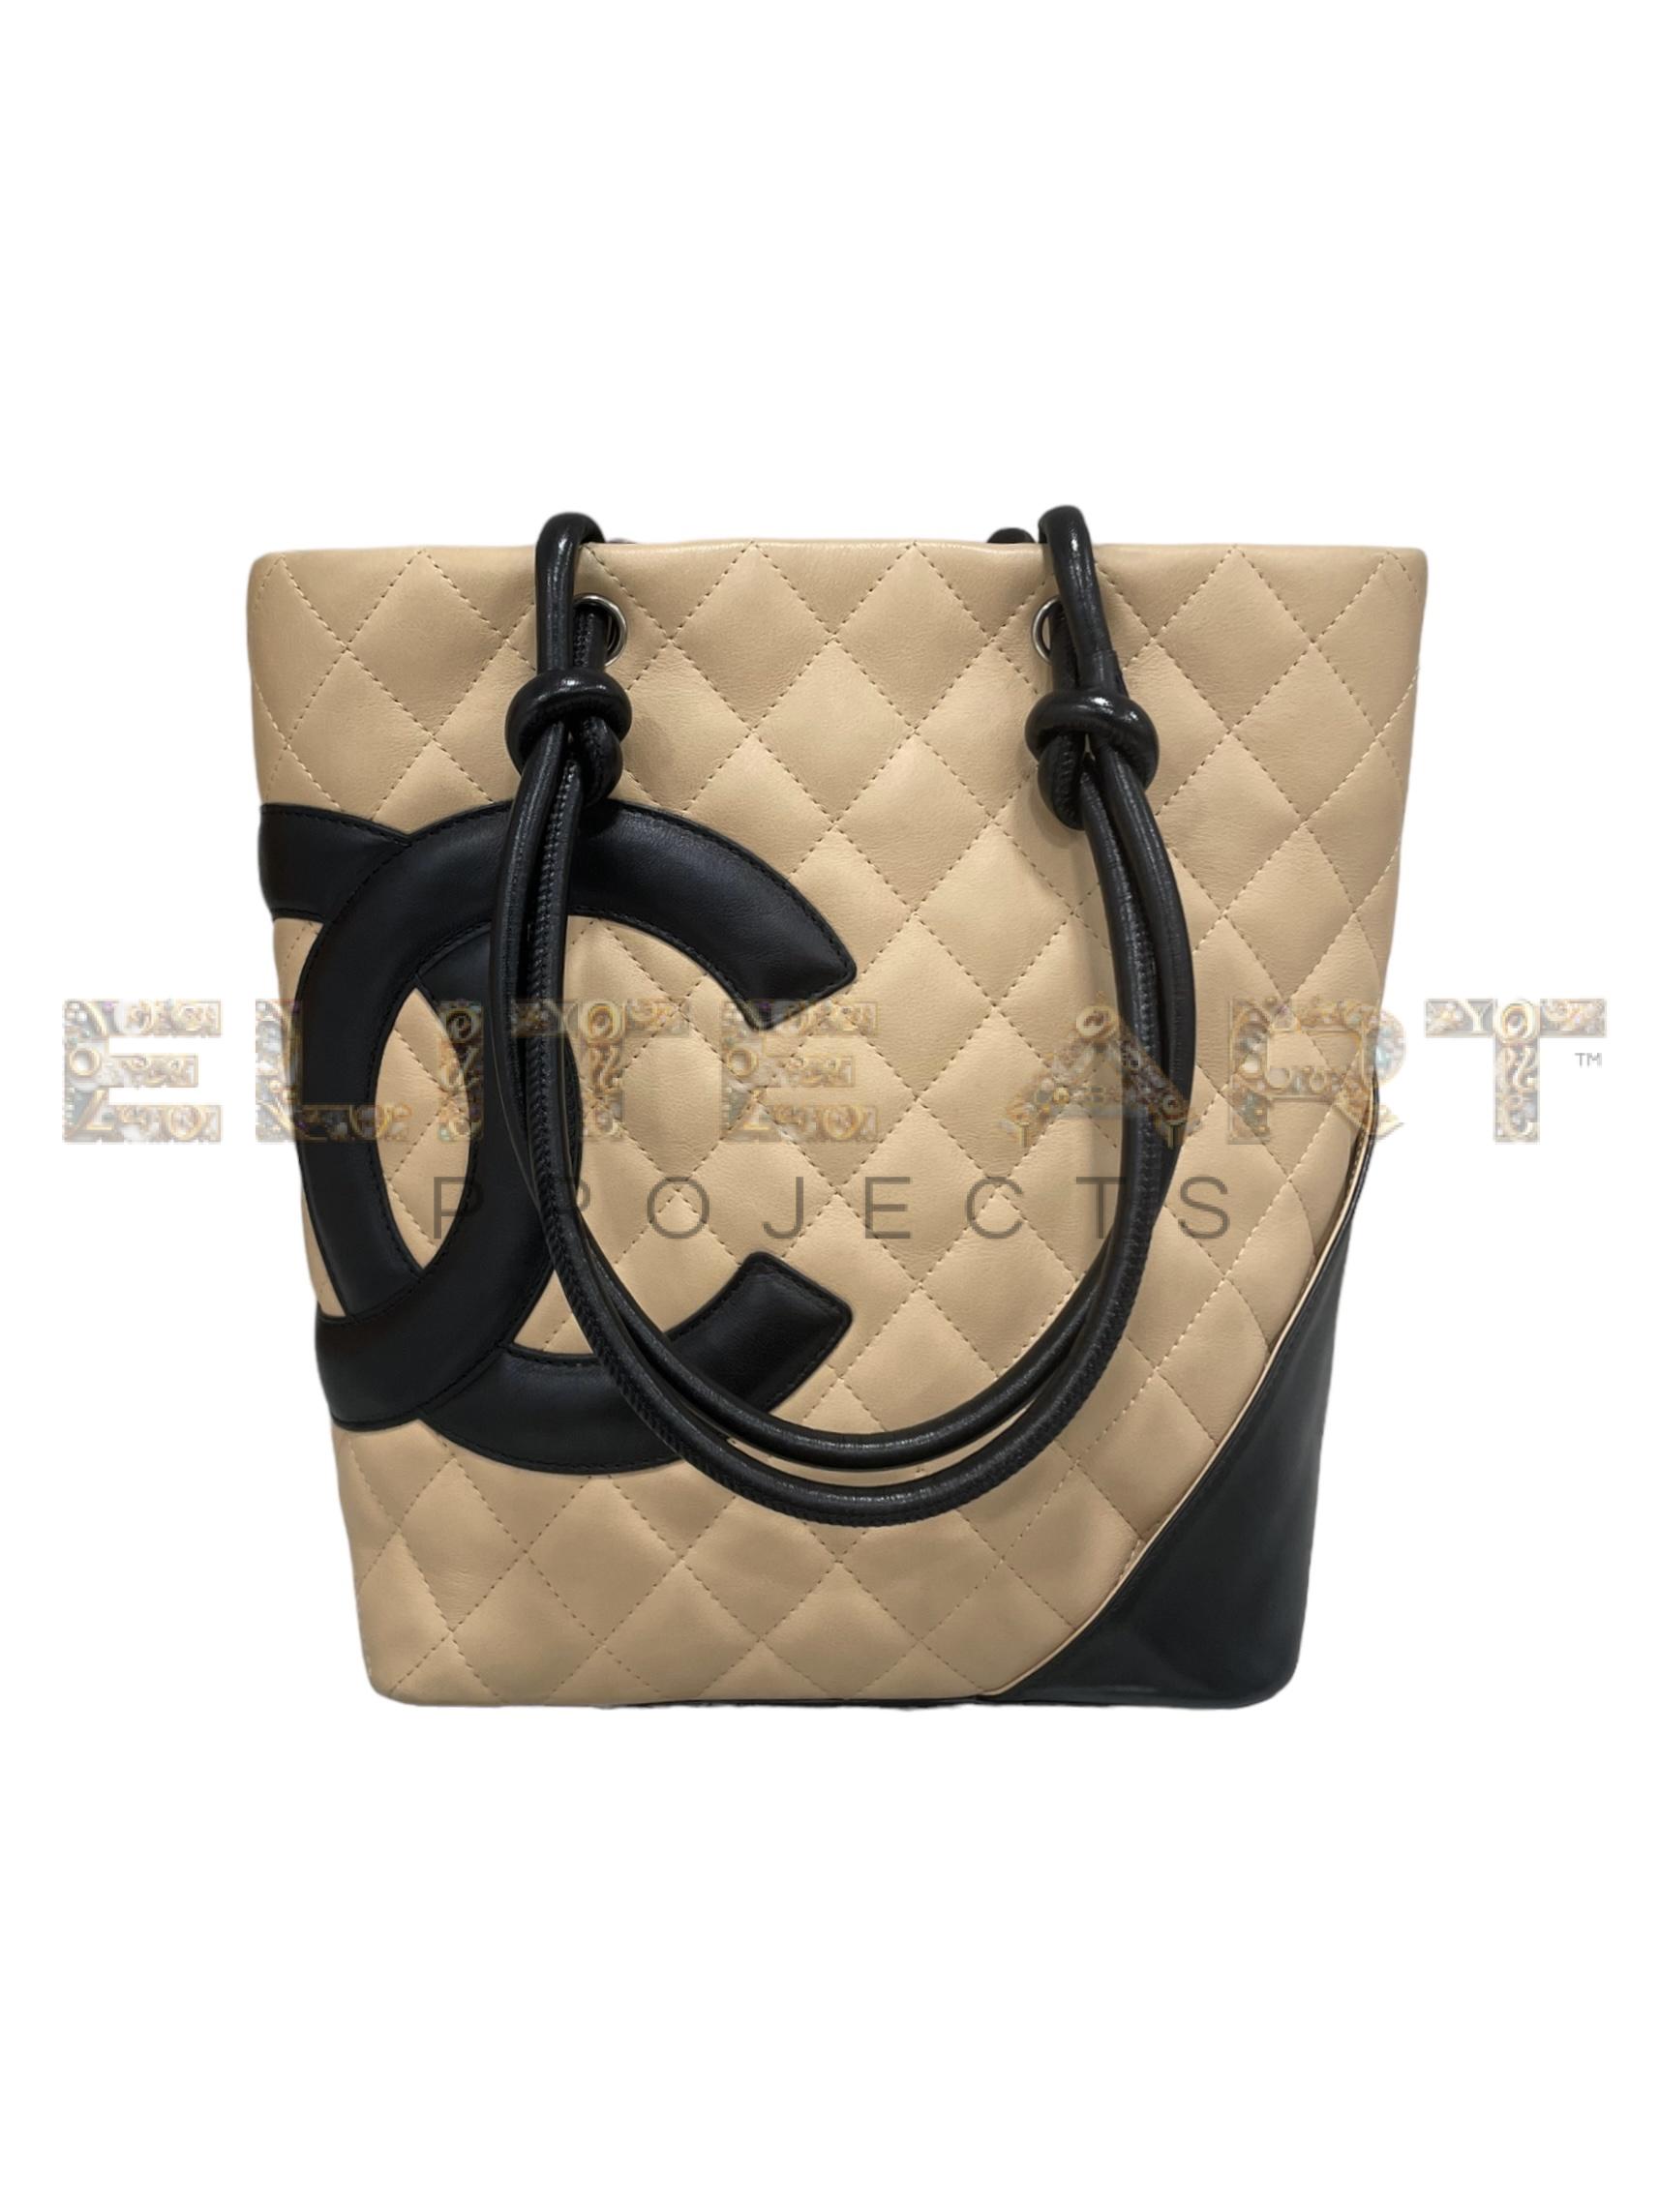 Cambon, beige and black leather, PST motif, silver hardware, elegance